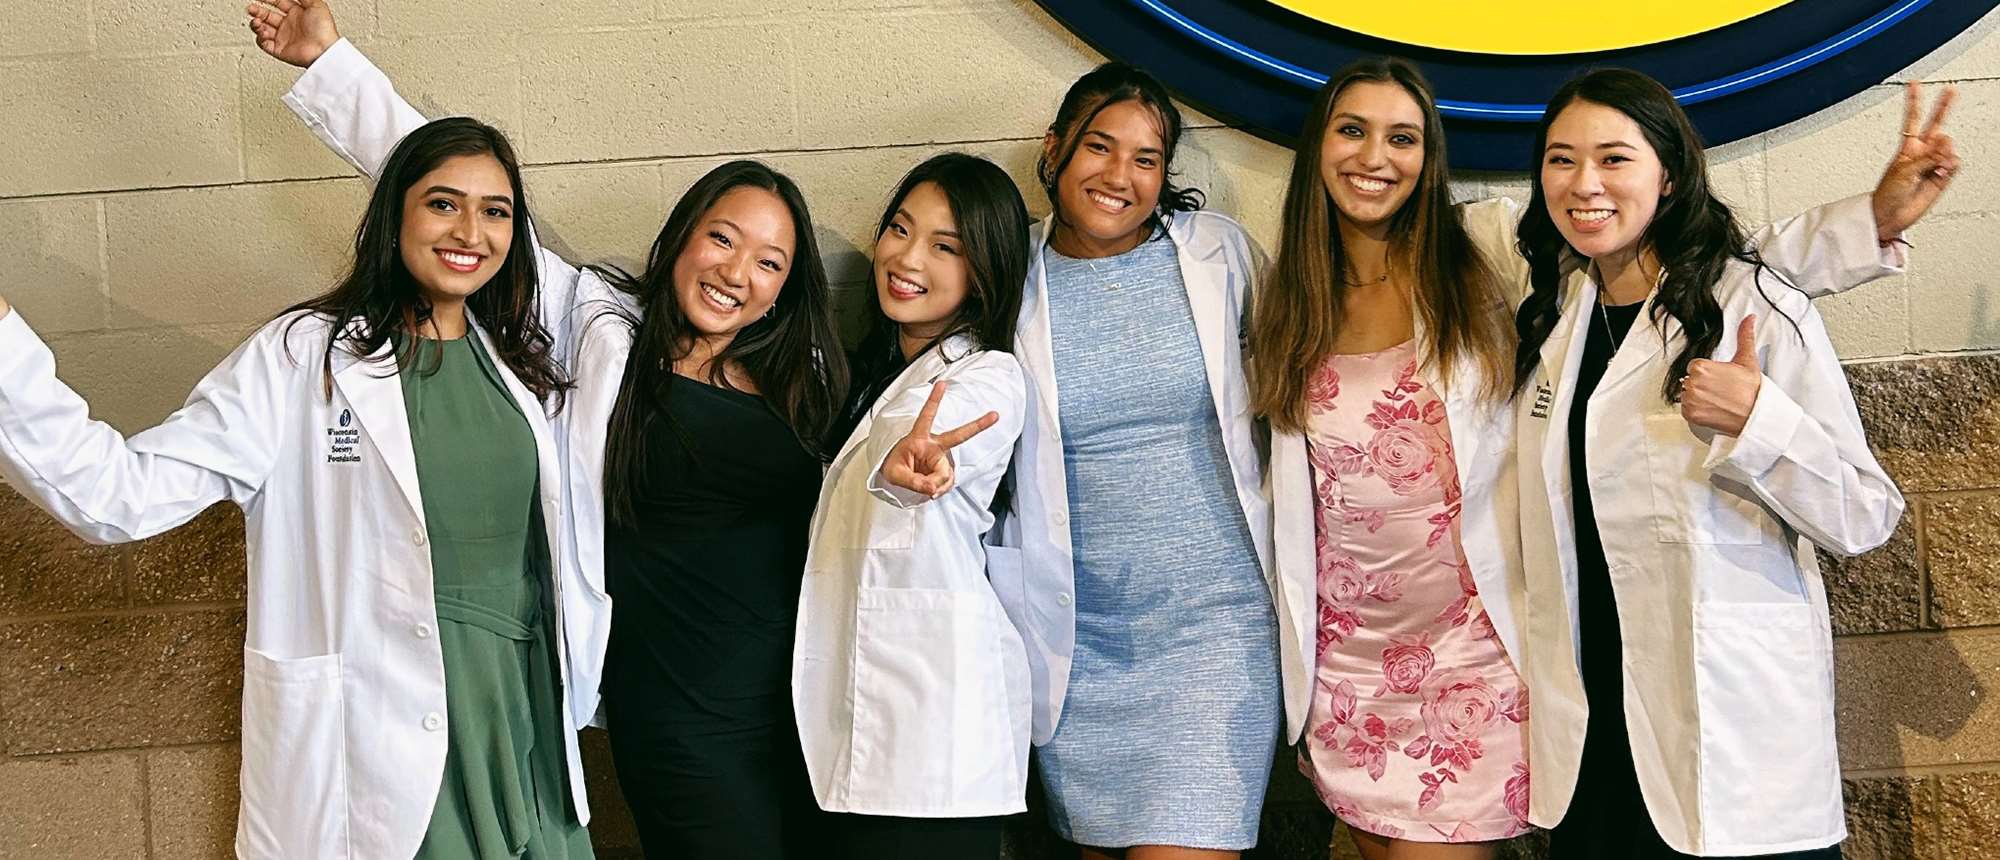 MCW student pursues passion for providing culturally competent care for Asian Americans